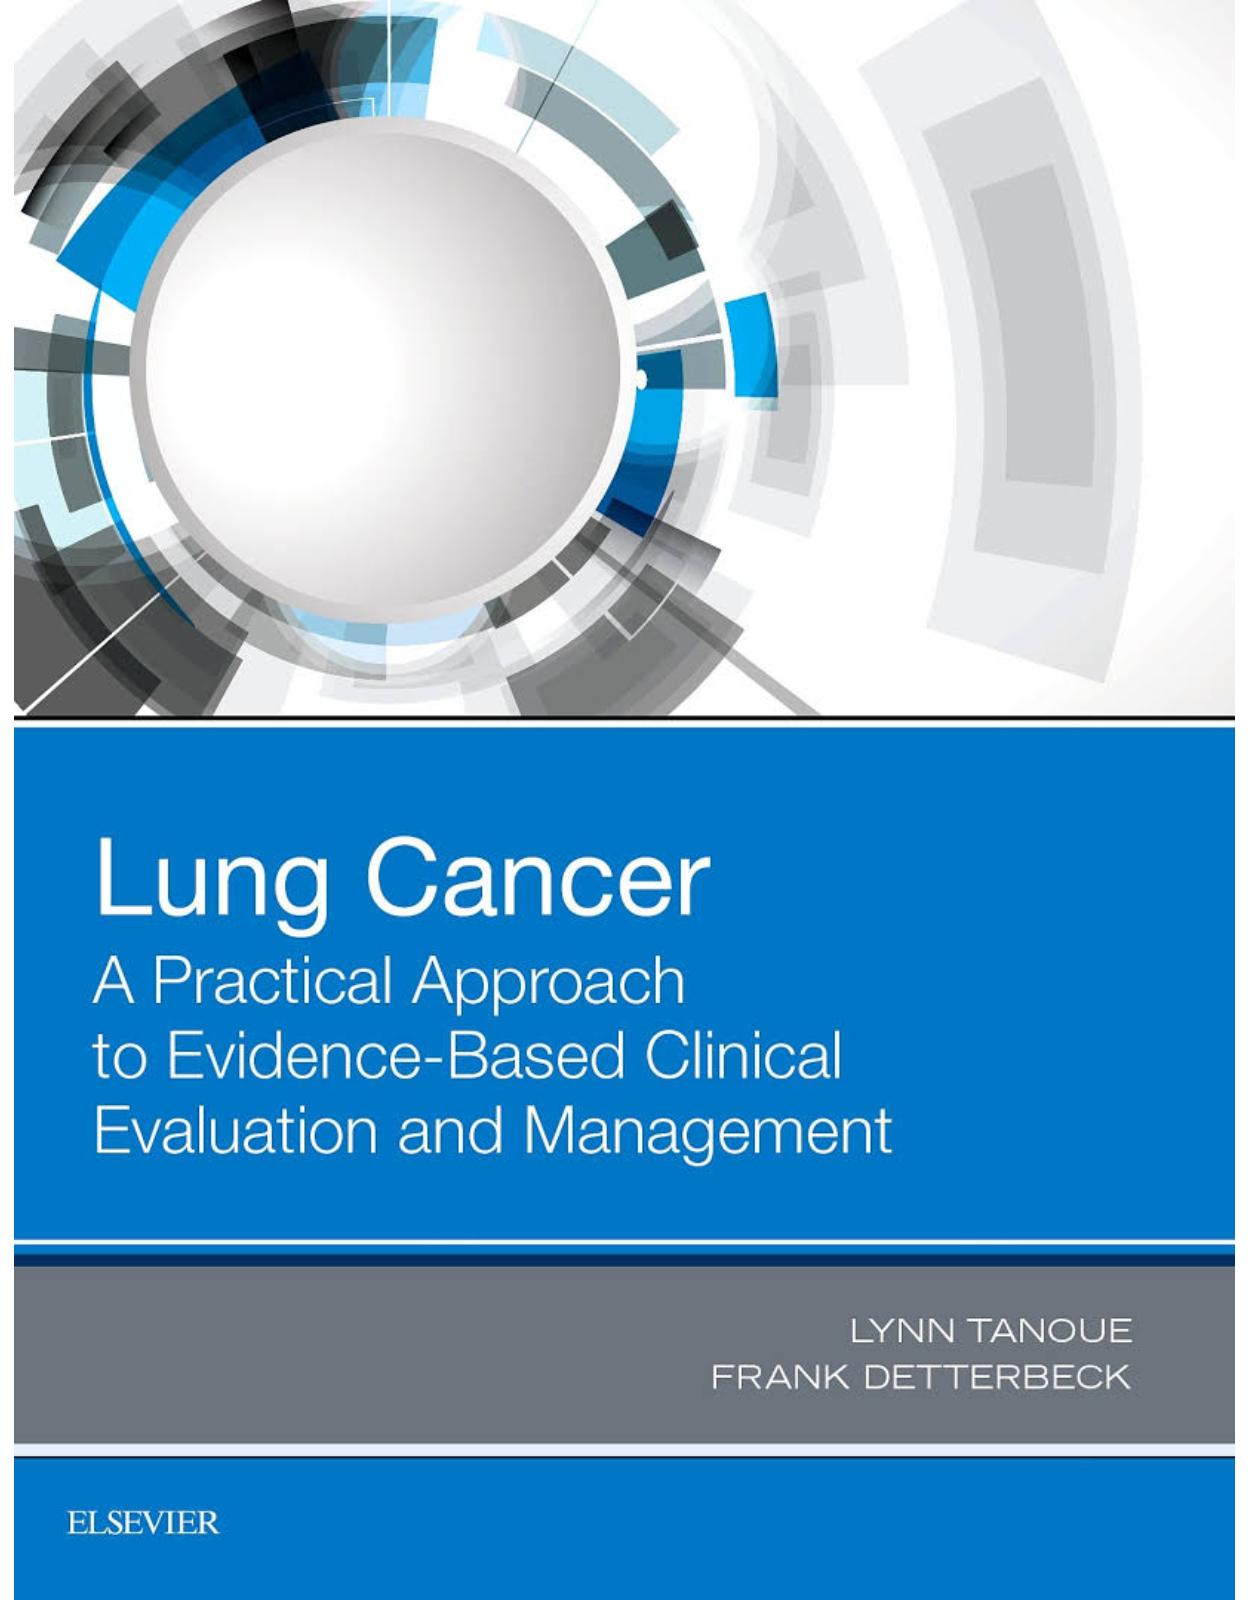 Lung Cancer: A Practical Approach to Evidence-Based Clinical Evaluation and Management, 1e